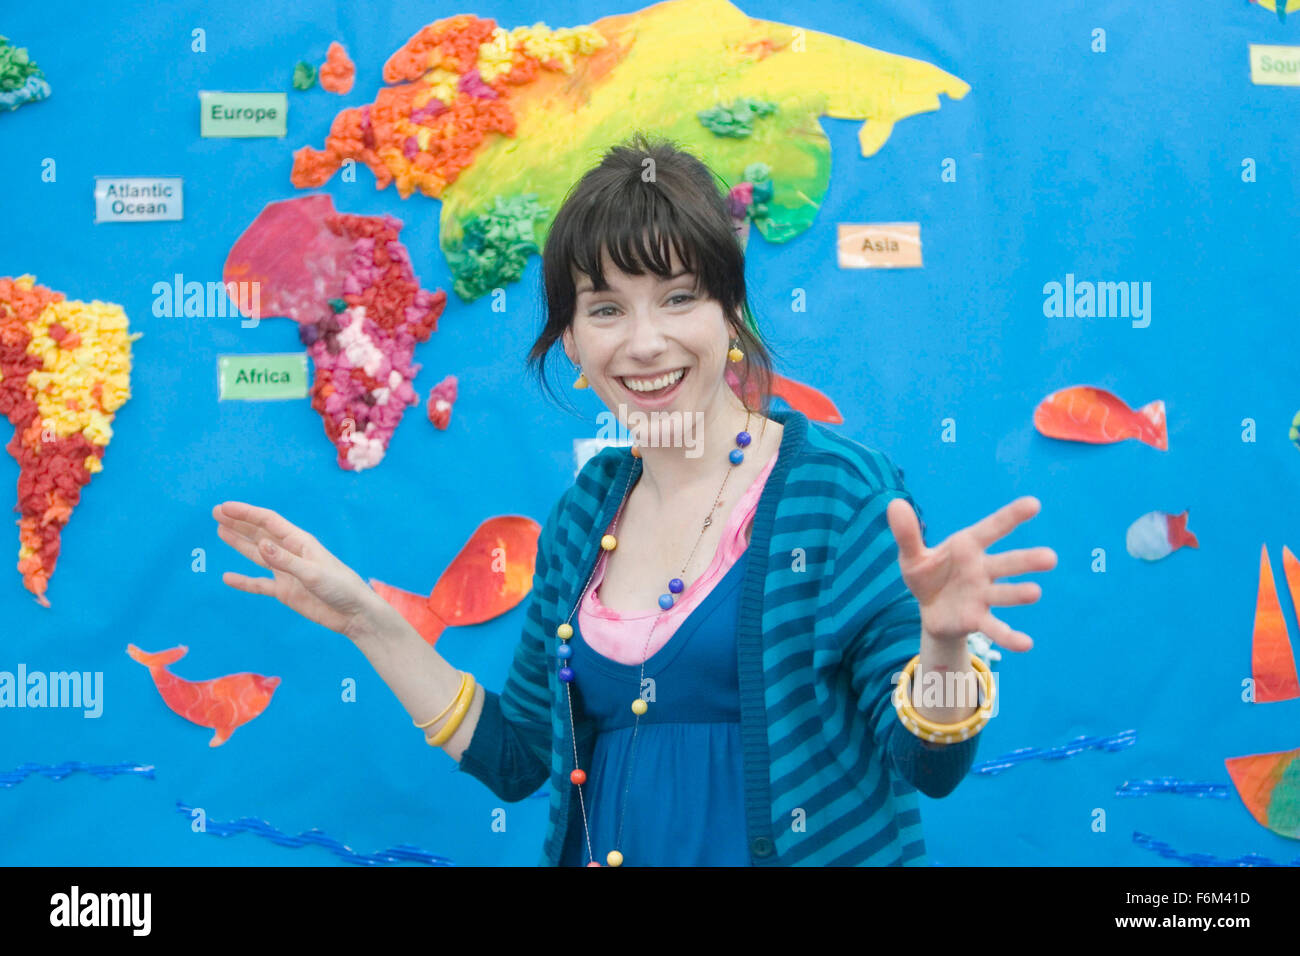 RELEASE DATE: Feb 12, 2008. MOVIE TITLE: Happy-Go-Lucky. STUDIO: Miramax Films. PLOT: A look at a few chapters in the life of Poppy, a cheery, colorful, North London schoolteacher whose optimism tends to exasperate those around her. PICTURED: SALLY HAWKINS as Poppy. Stock Photo